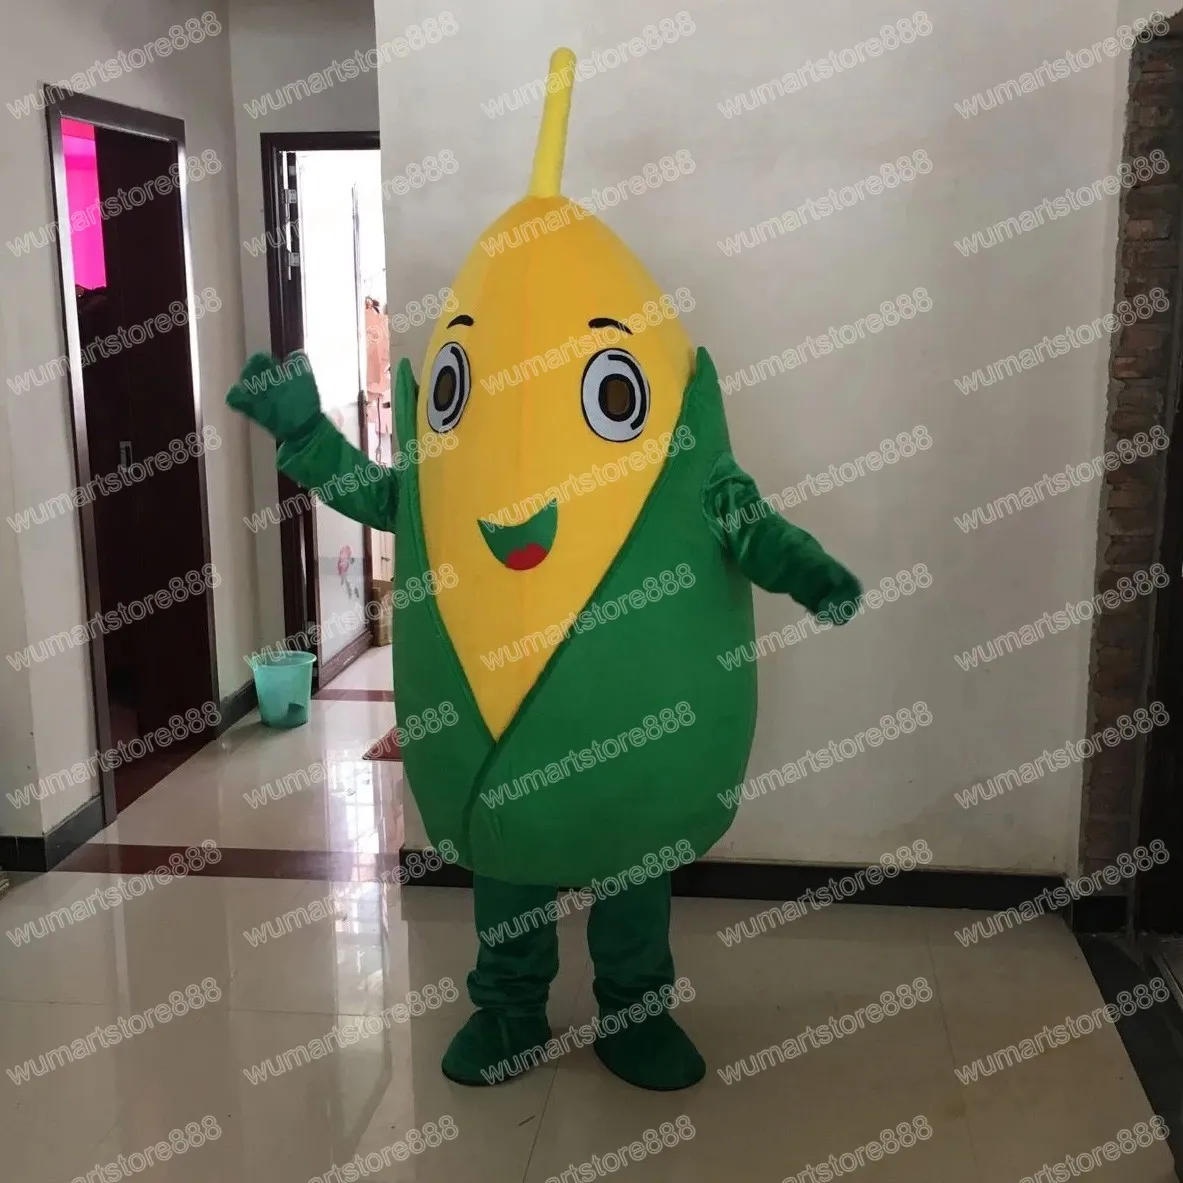 Halloween Corn Mascot Costume High Quality Cartoon Animal Theme Character Carnival Festival Fancy Dress Adults Size Xmas Outdoor Party Outfit